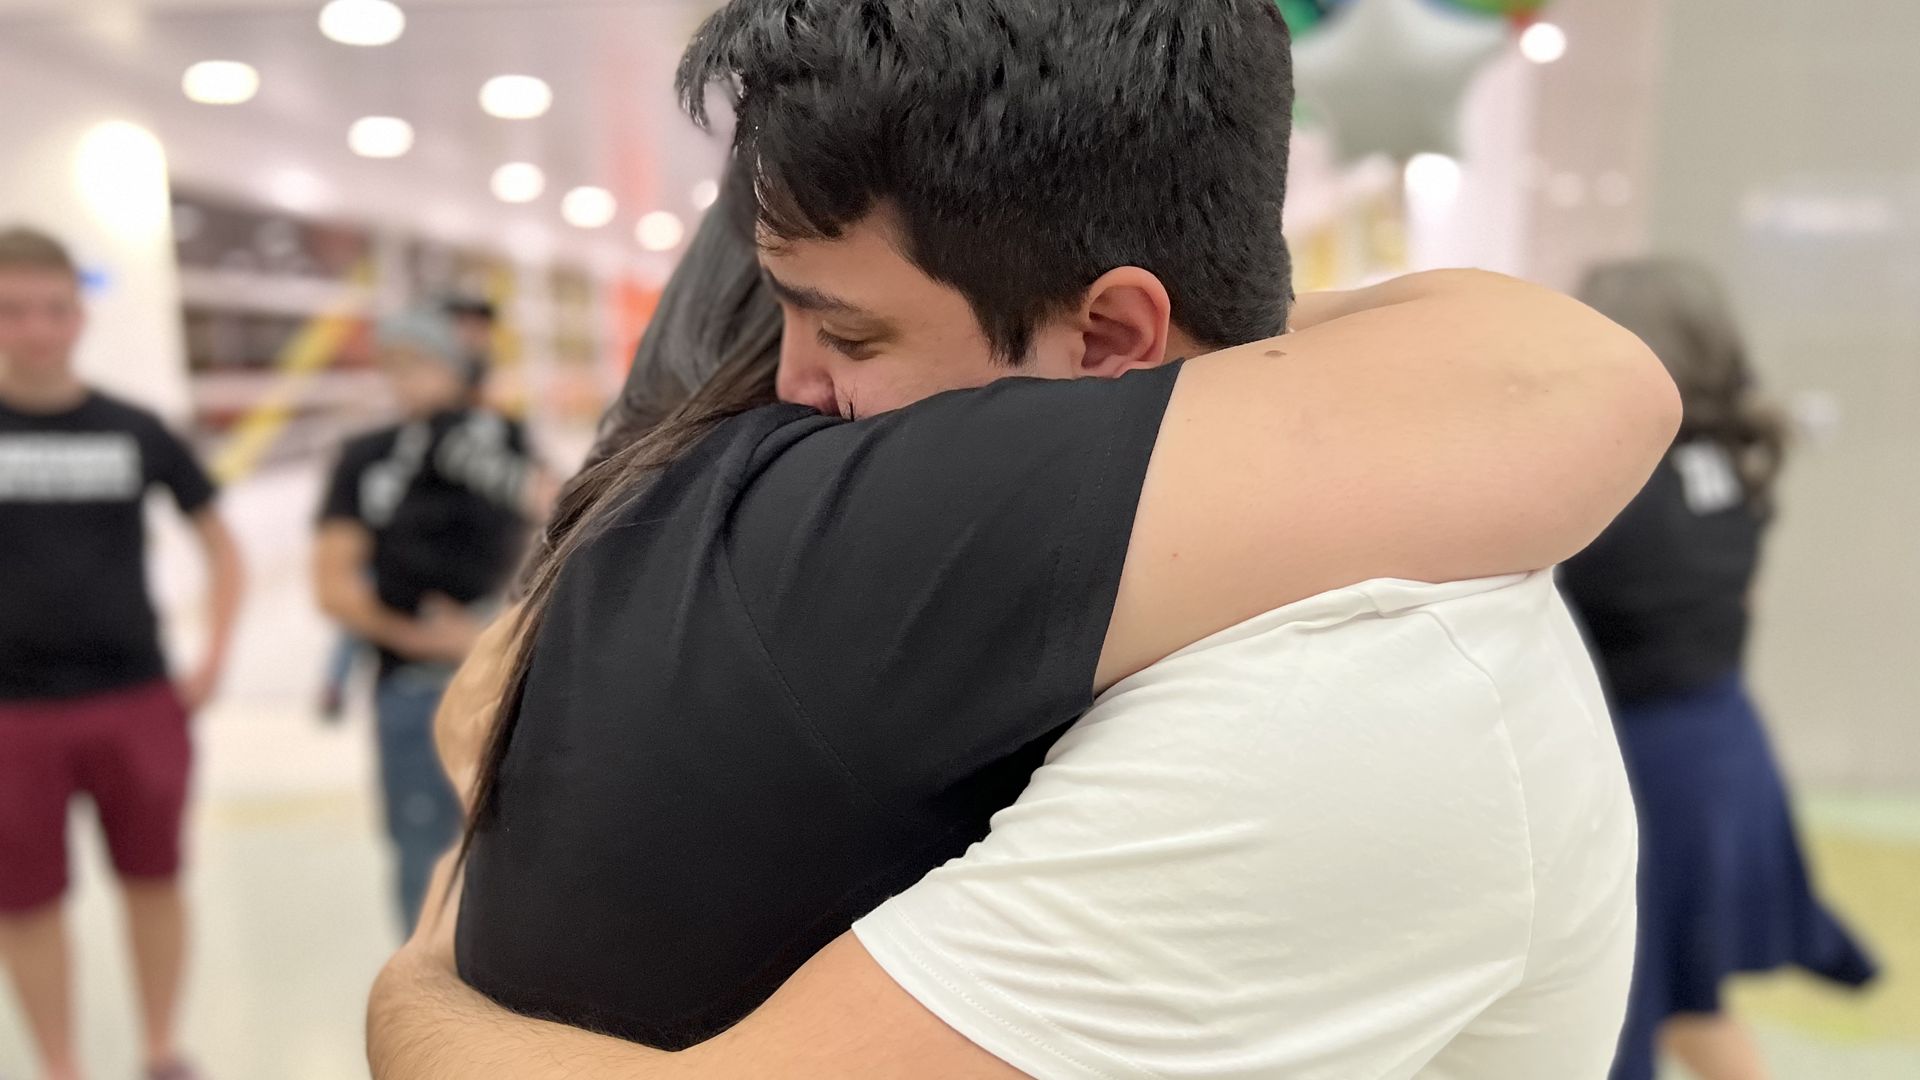 A woman and a Venezuelan man who had been deported from the U.S. embrace